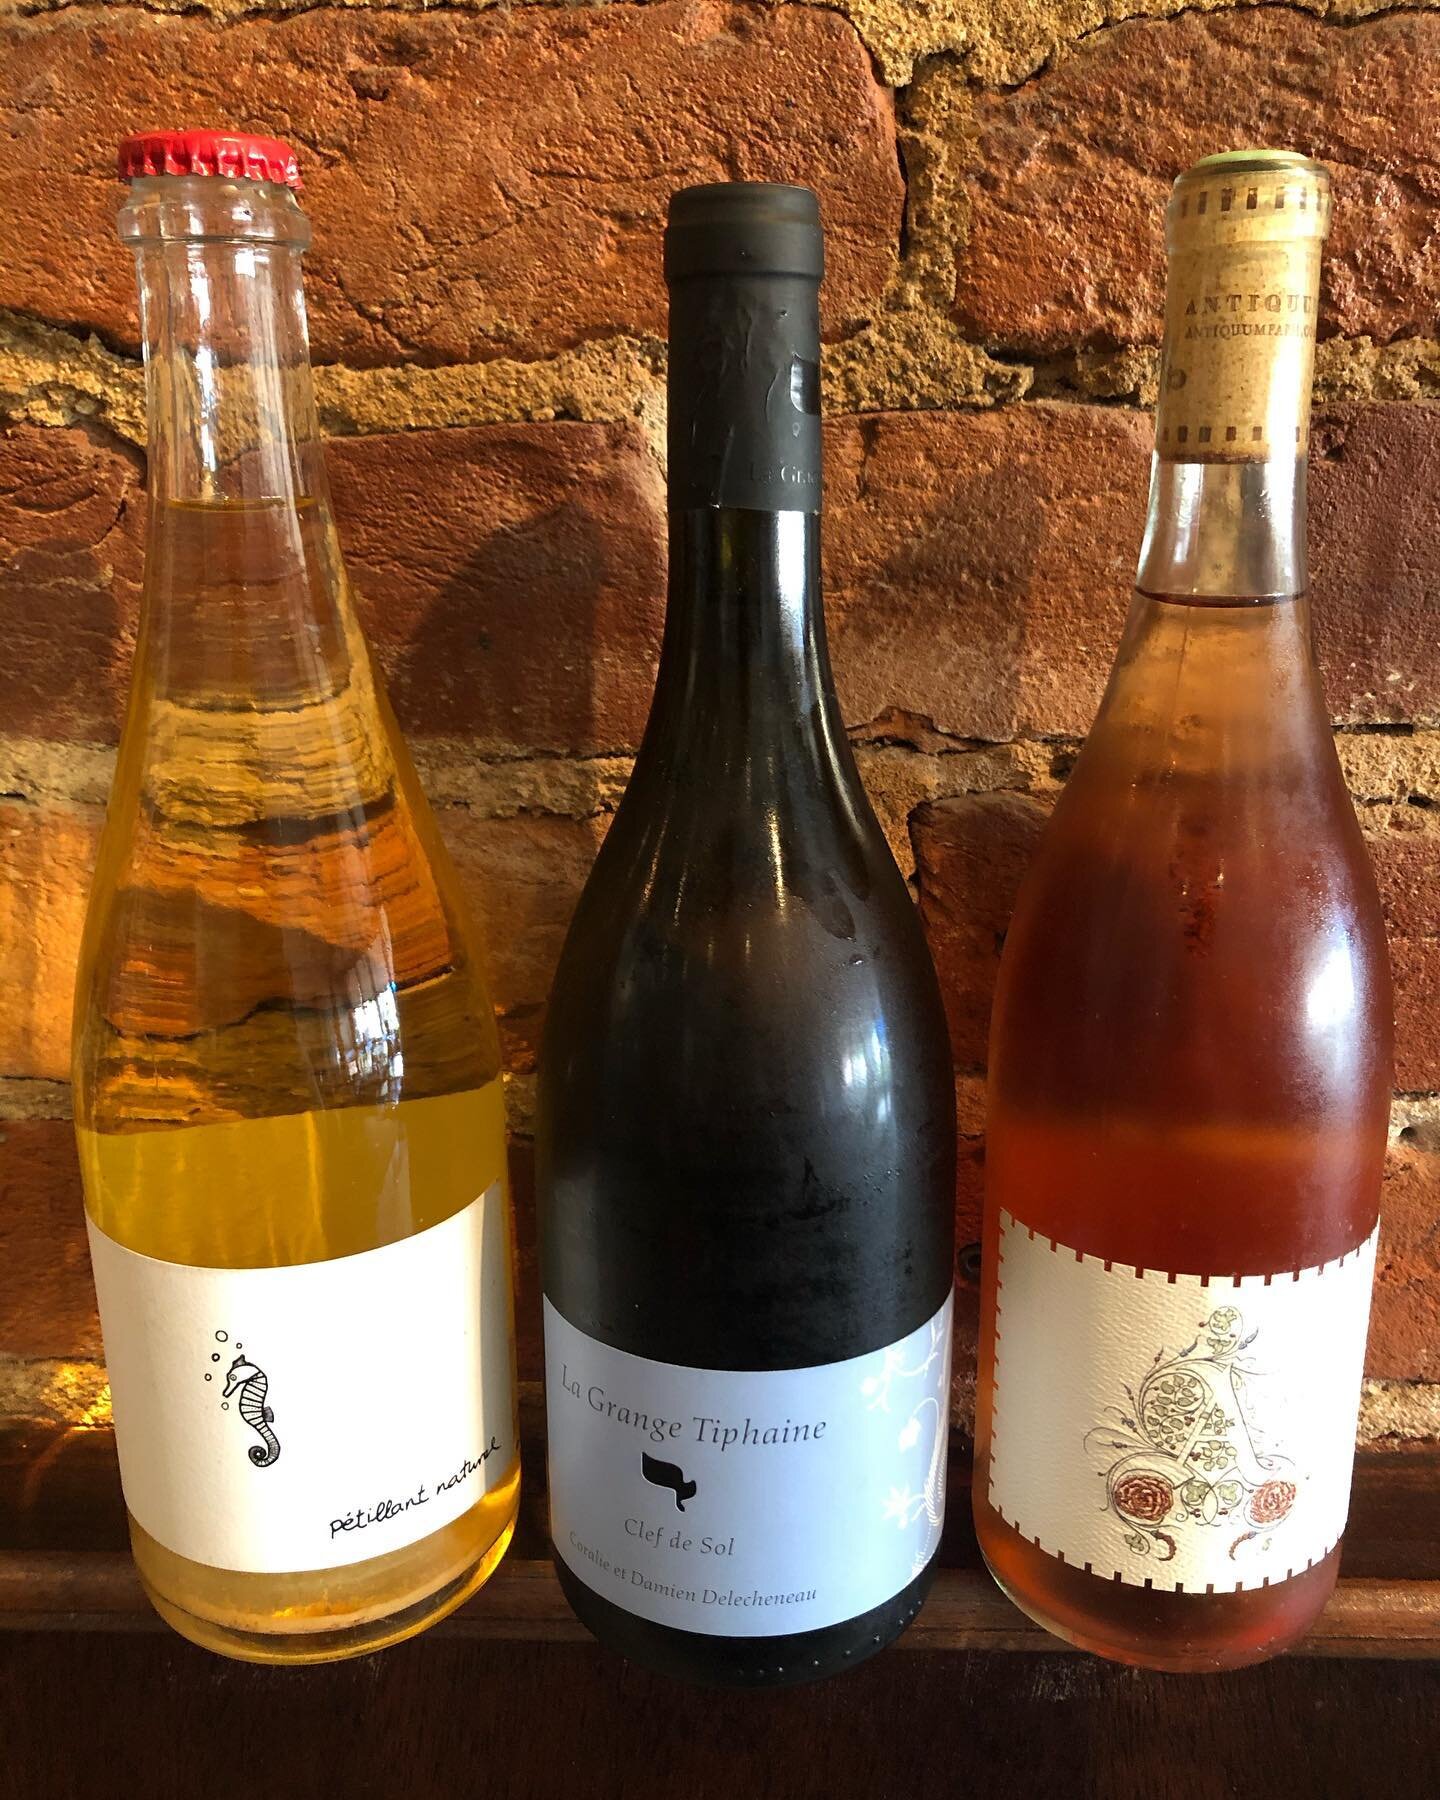 Don&rsquo;t forgot to stock up on some refreshing summer wines for your holiday weekend. 

@earlymountain Pet Nat &lsquo;17
@lagrangetiphaine Clef de Sol &lsquo;17
@antiquumfarmer Rose &lsquo;18